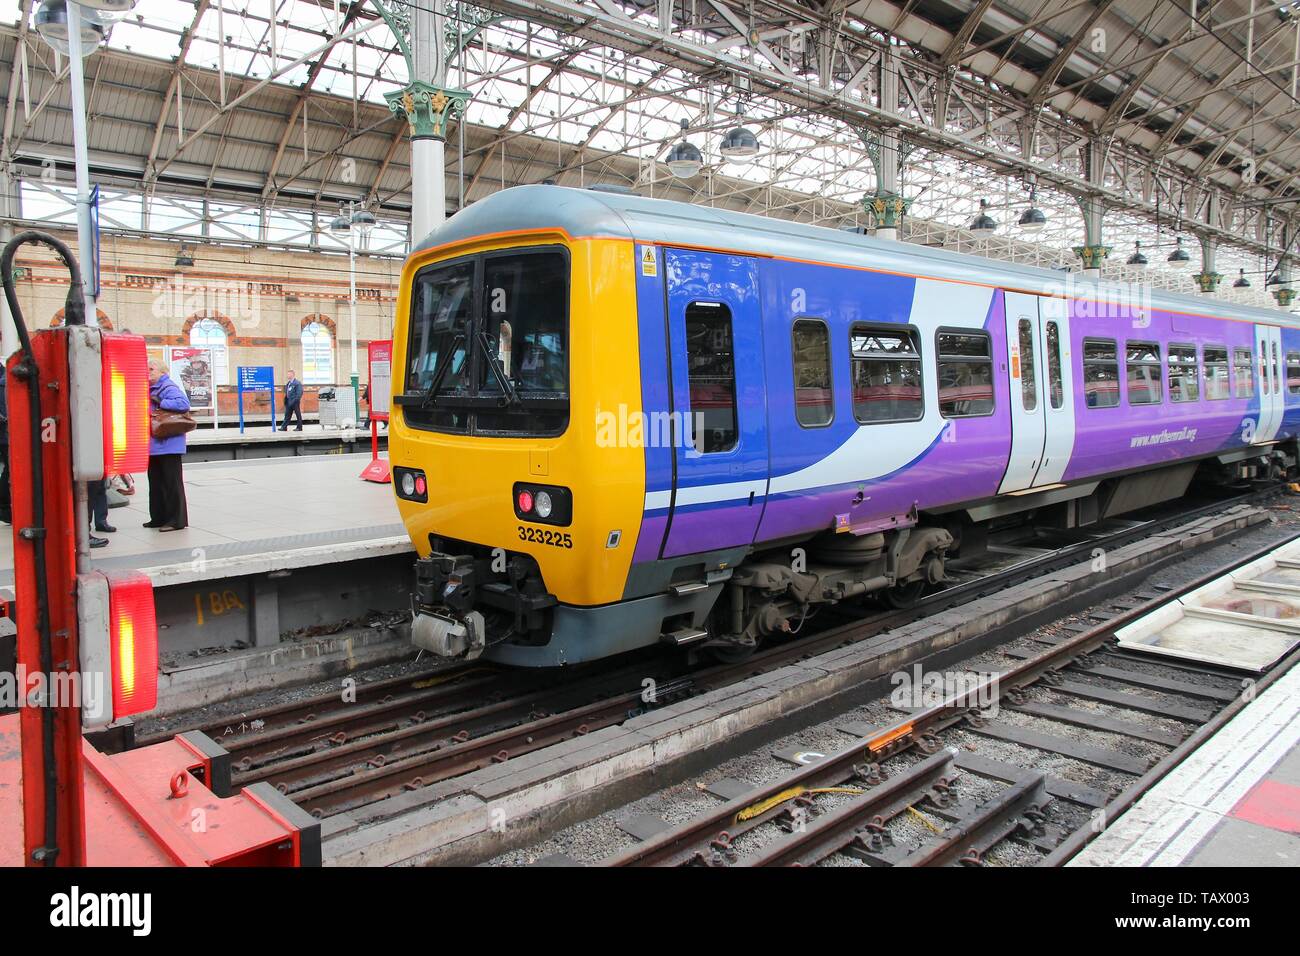 MANCHESTER, UK - APRIL 23, 2013: People walk by Northern Rail train in Manchester, UK. NR is part of Serco-Abellio joint venture. NR has fleet of 313  Stock Photo